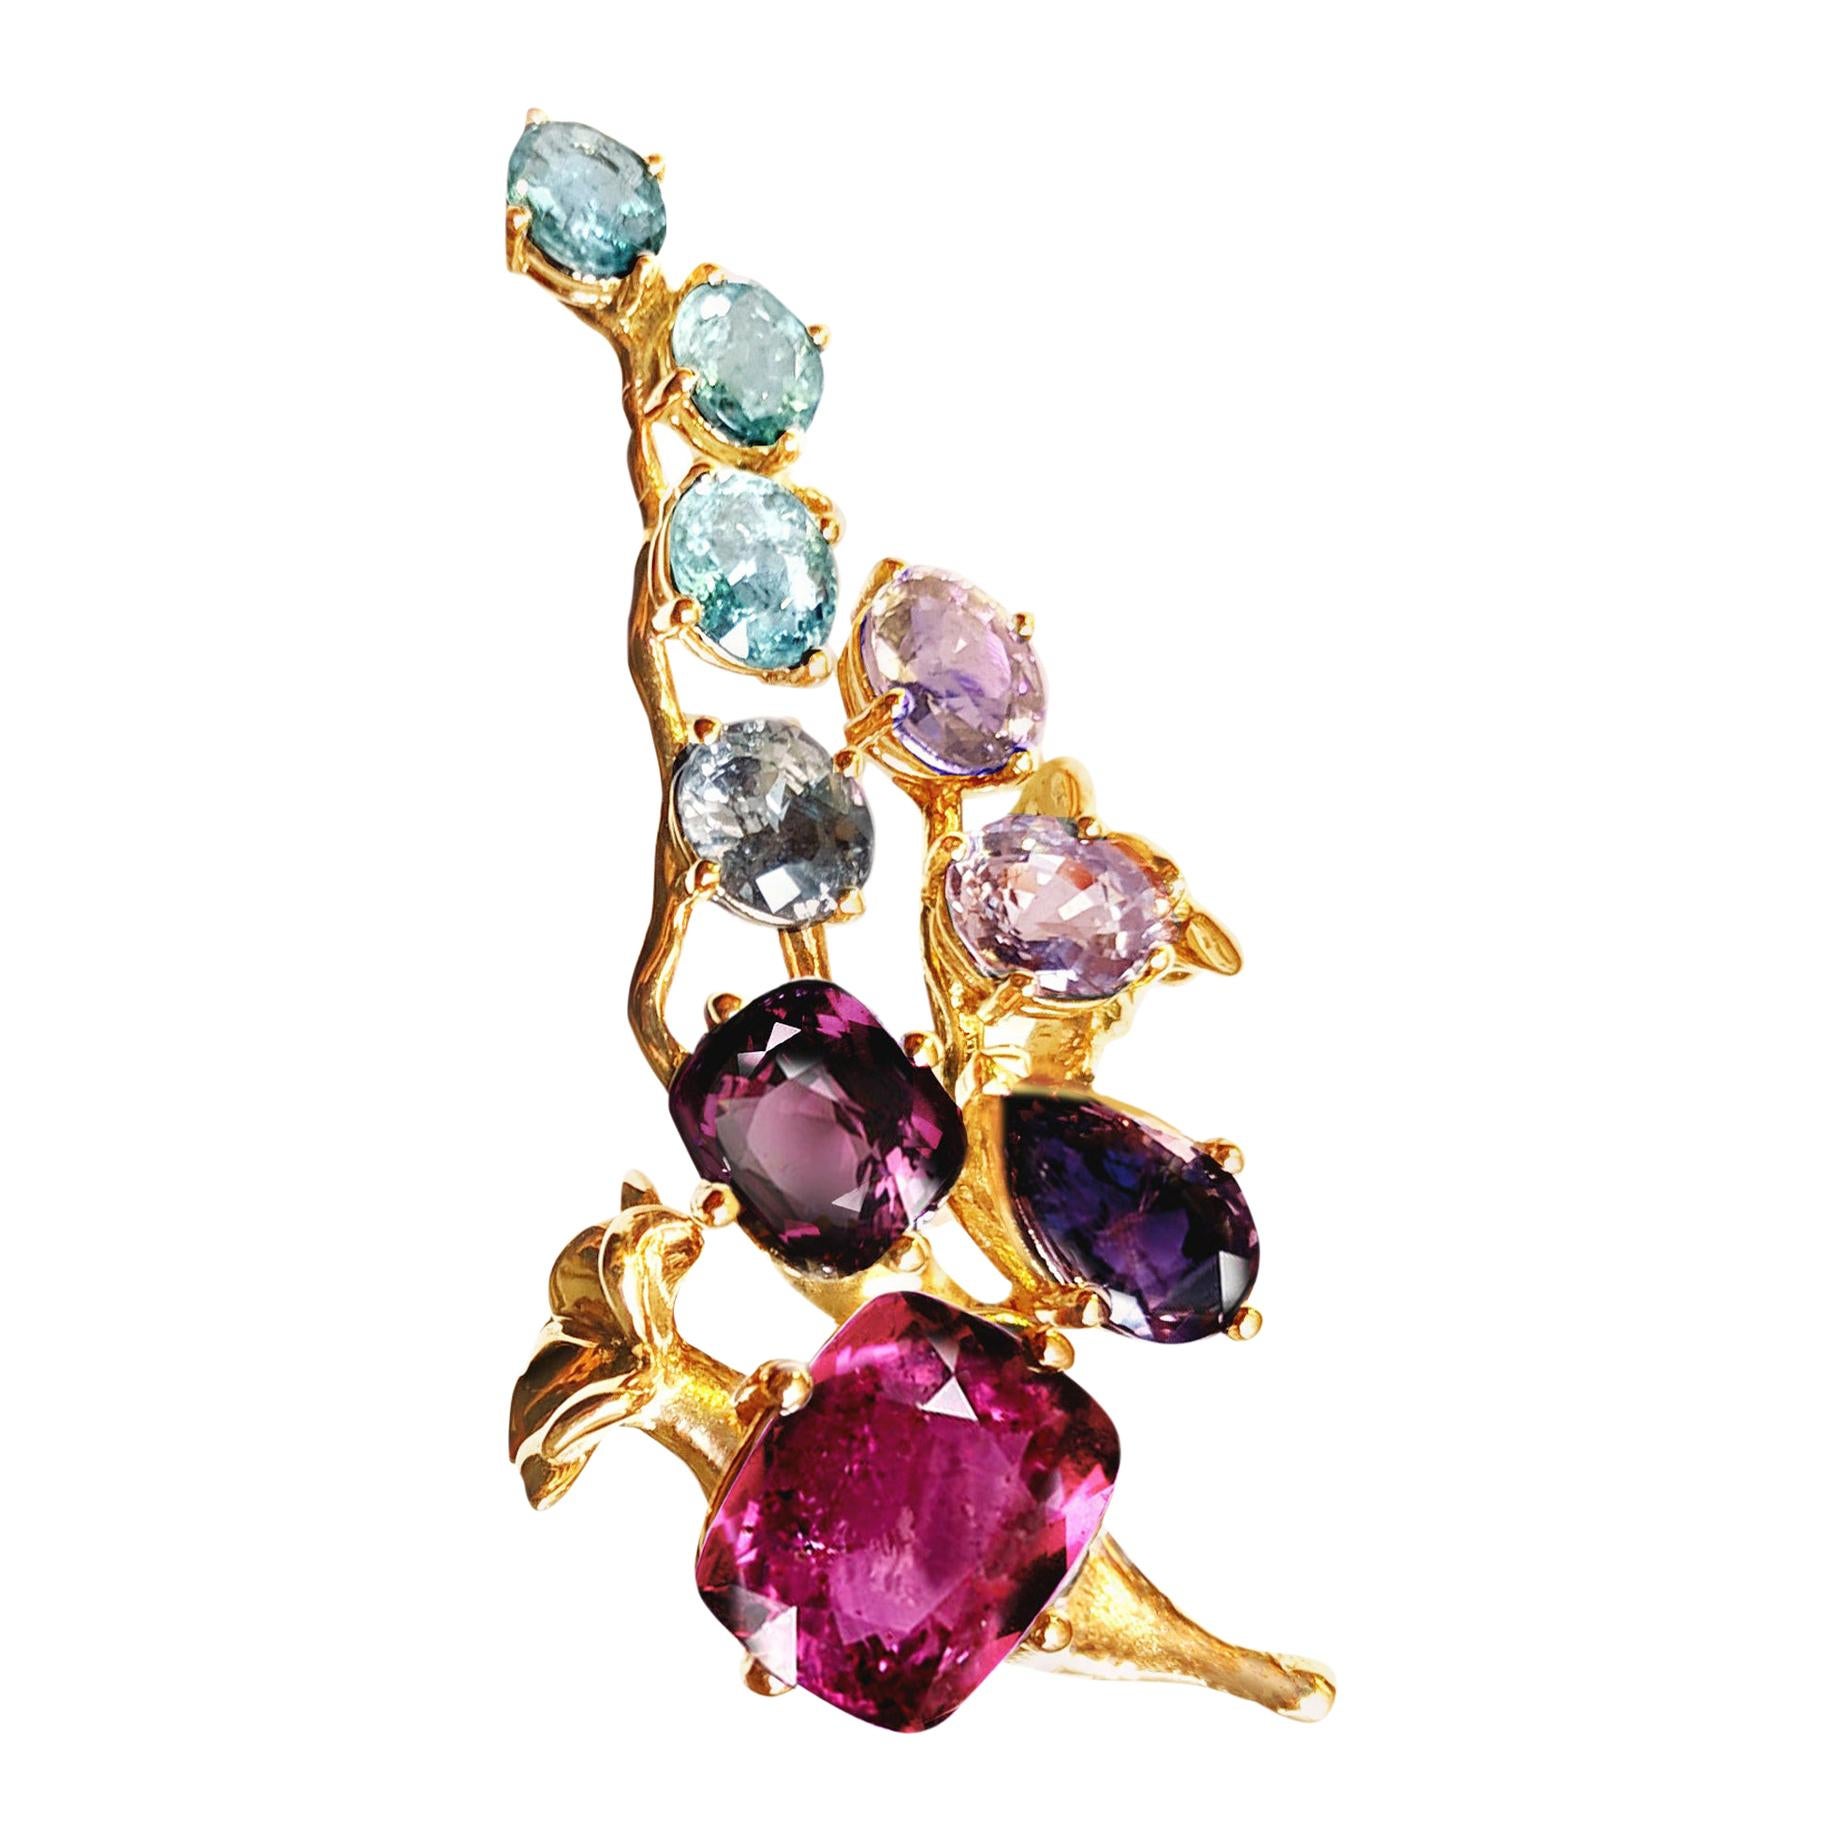 Eighteen Karat Gold Cluster Ring with Sapphires and Paraiba Tourmalines